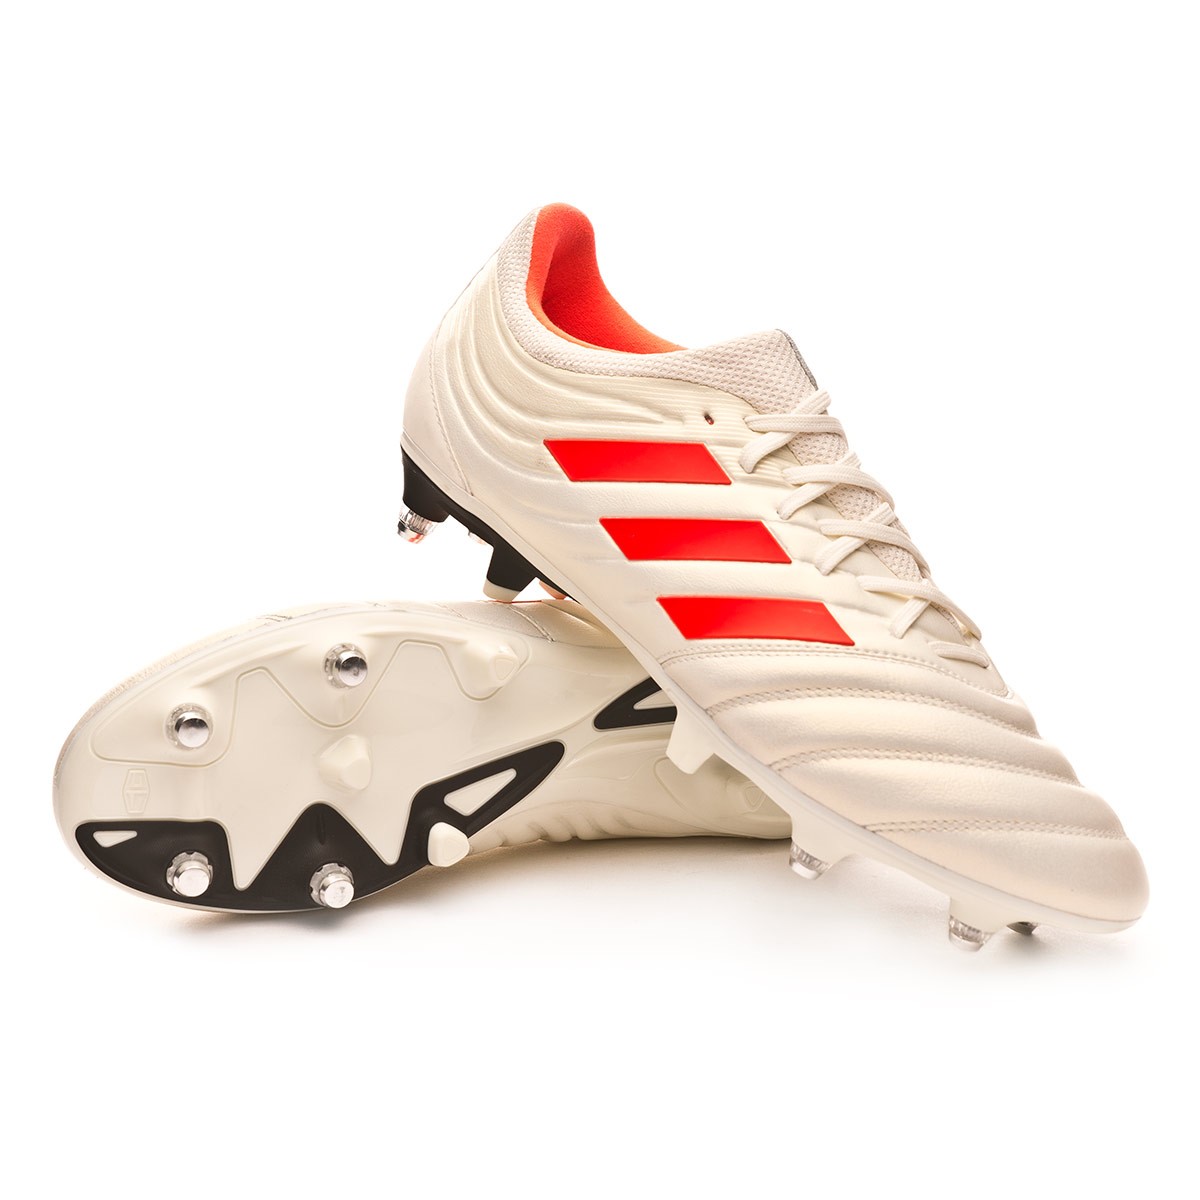 Football Boots adidas Copa 19.3 SG Off white-Solar red-Core black -  Football store Fútbol Emotion